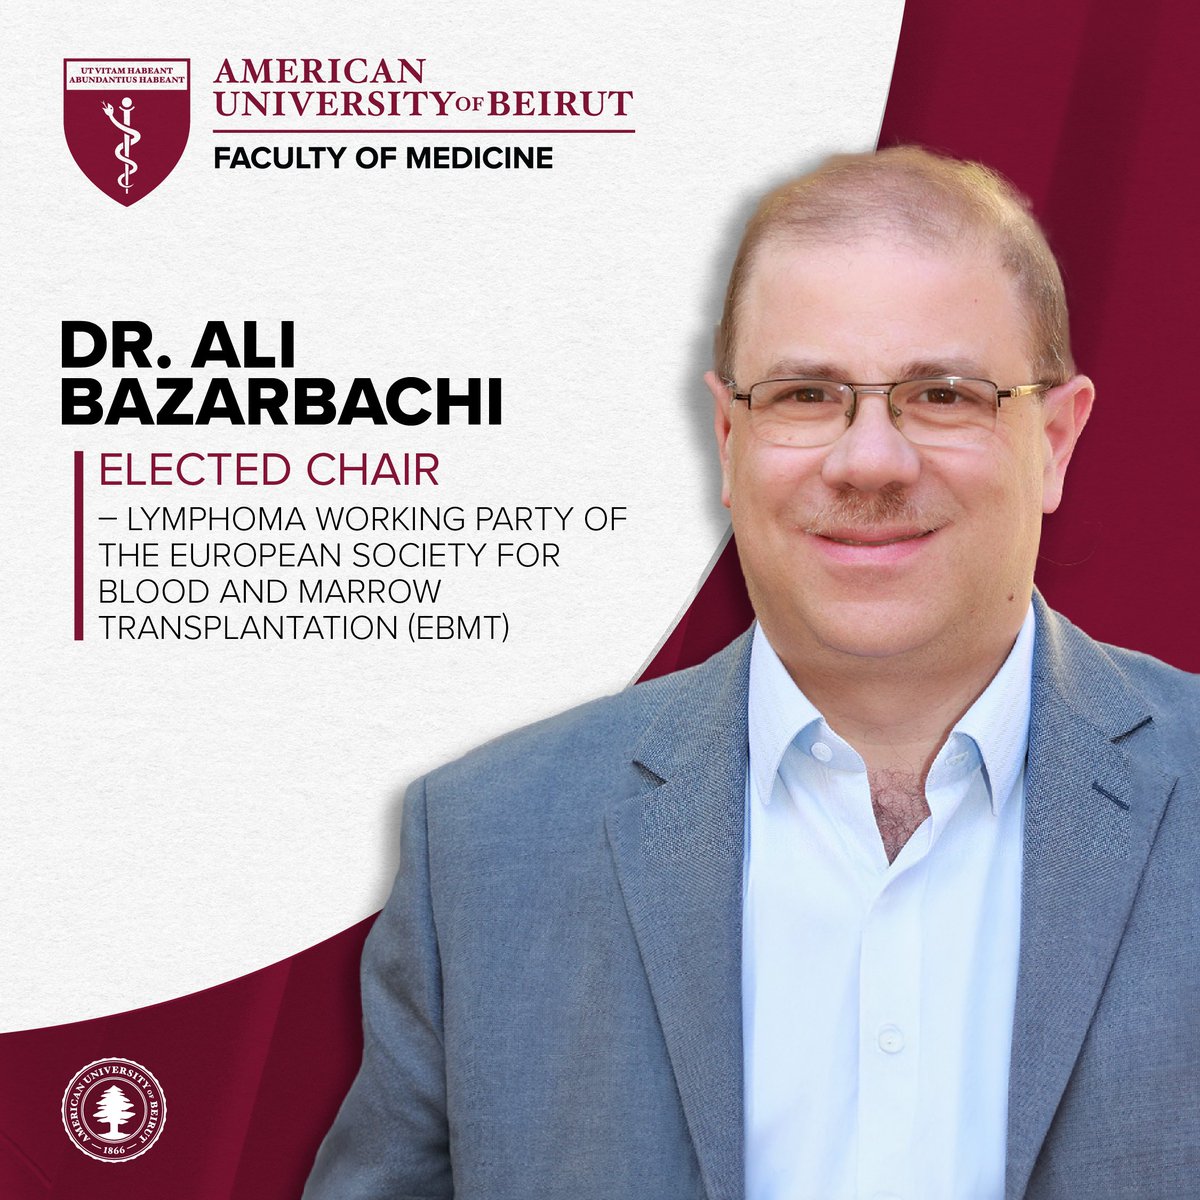 🌟Congratulations to Dr. Ali Bazarbachi on being elected Chair of the Lymphoma Working Party of the European Society for Blood and Marrow Transplantation (EBMT)! Learn more about his accomplishment: rb.gy/ubmml2